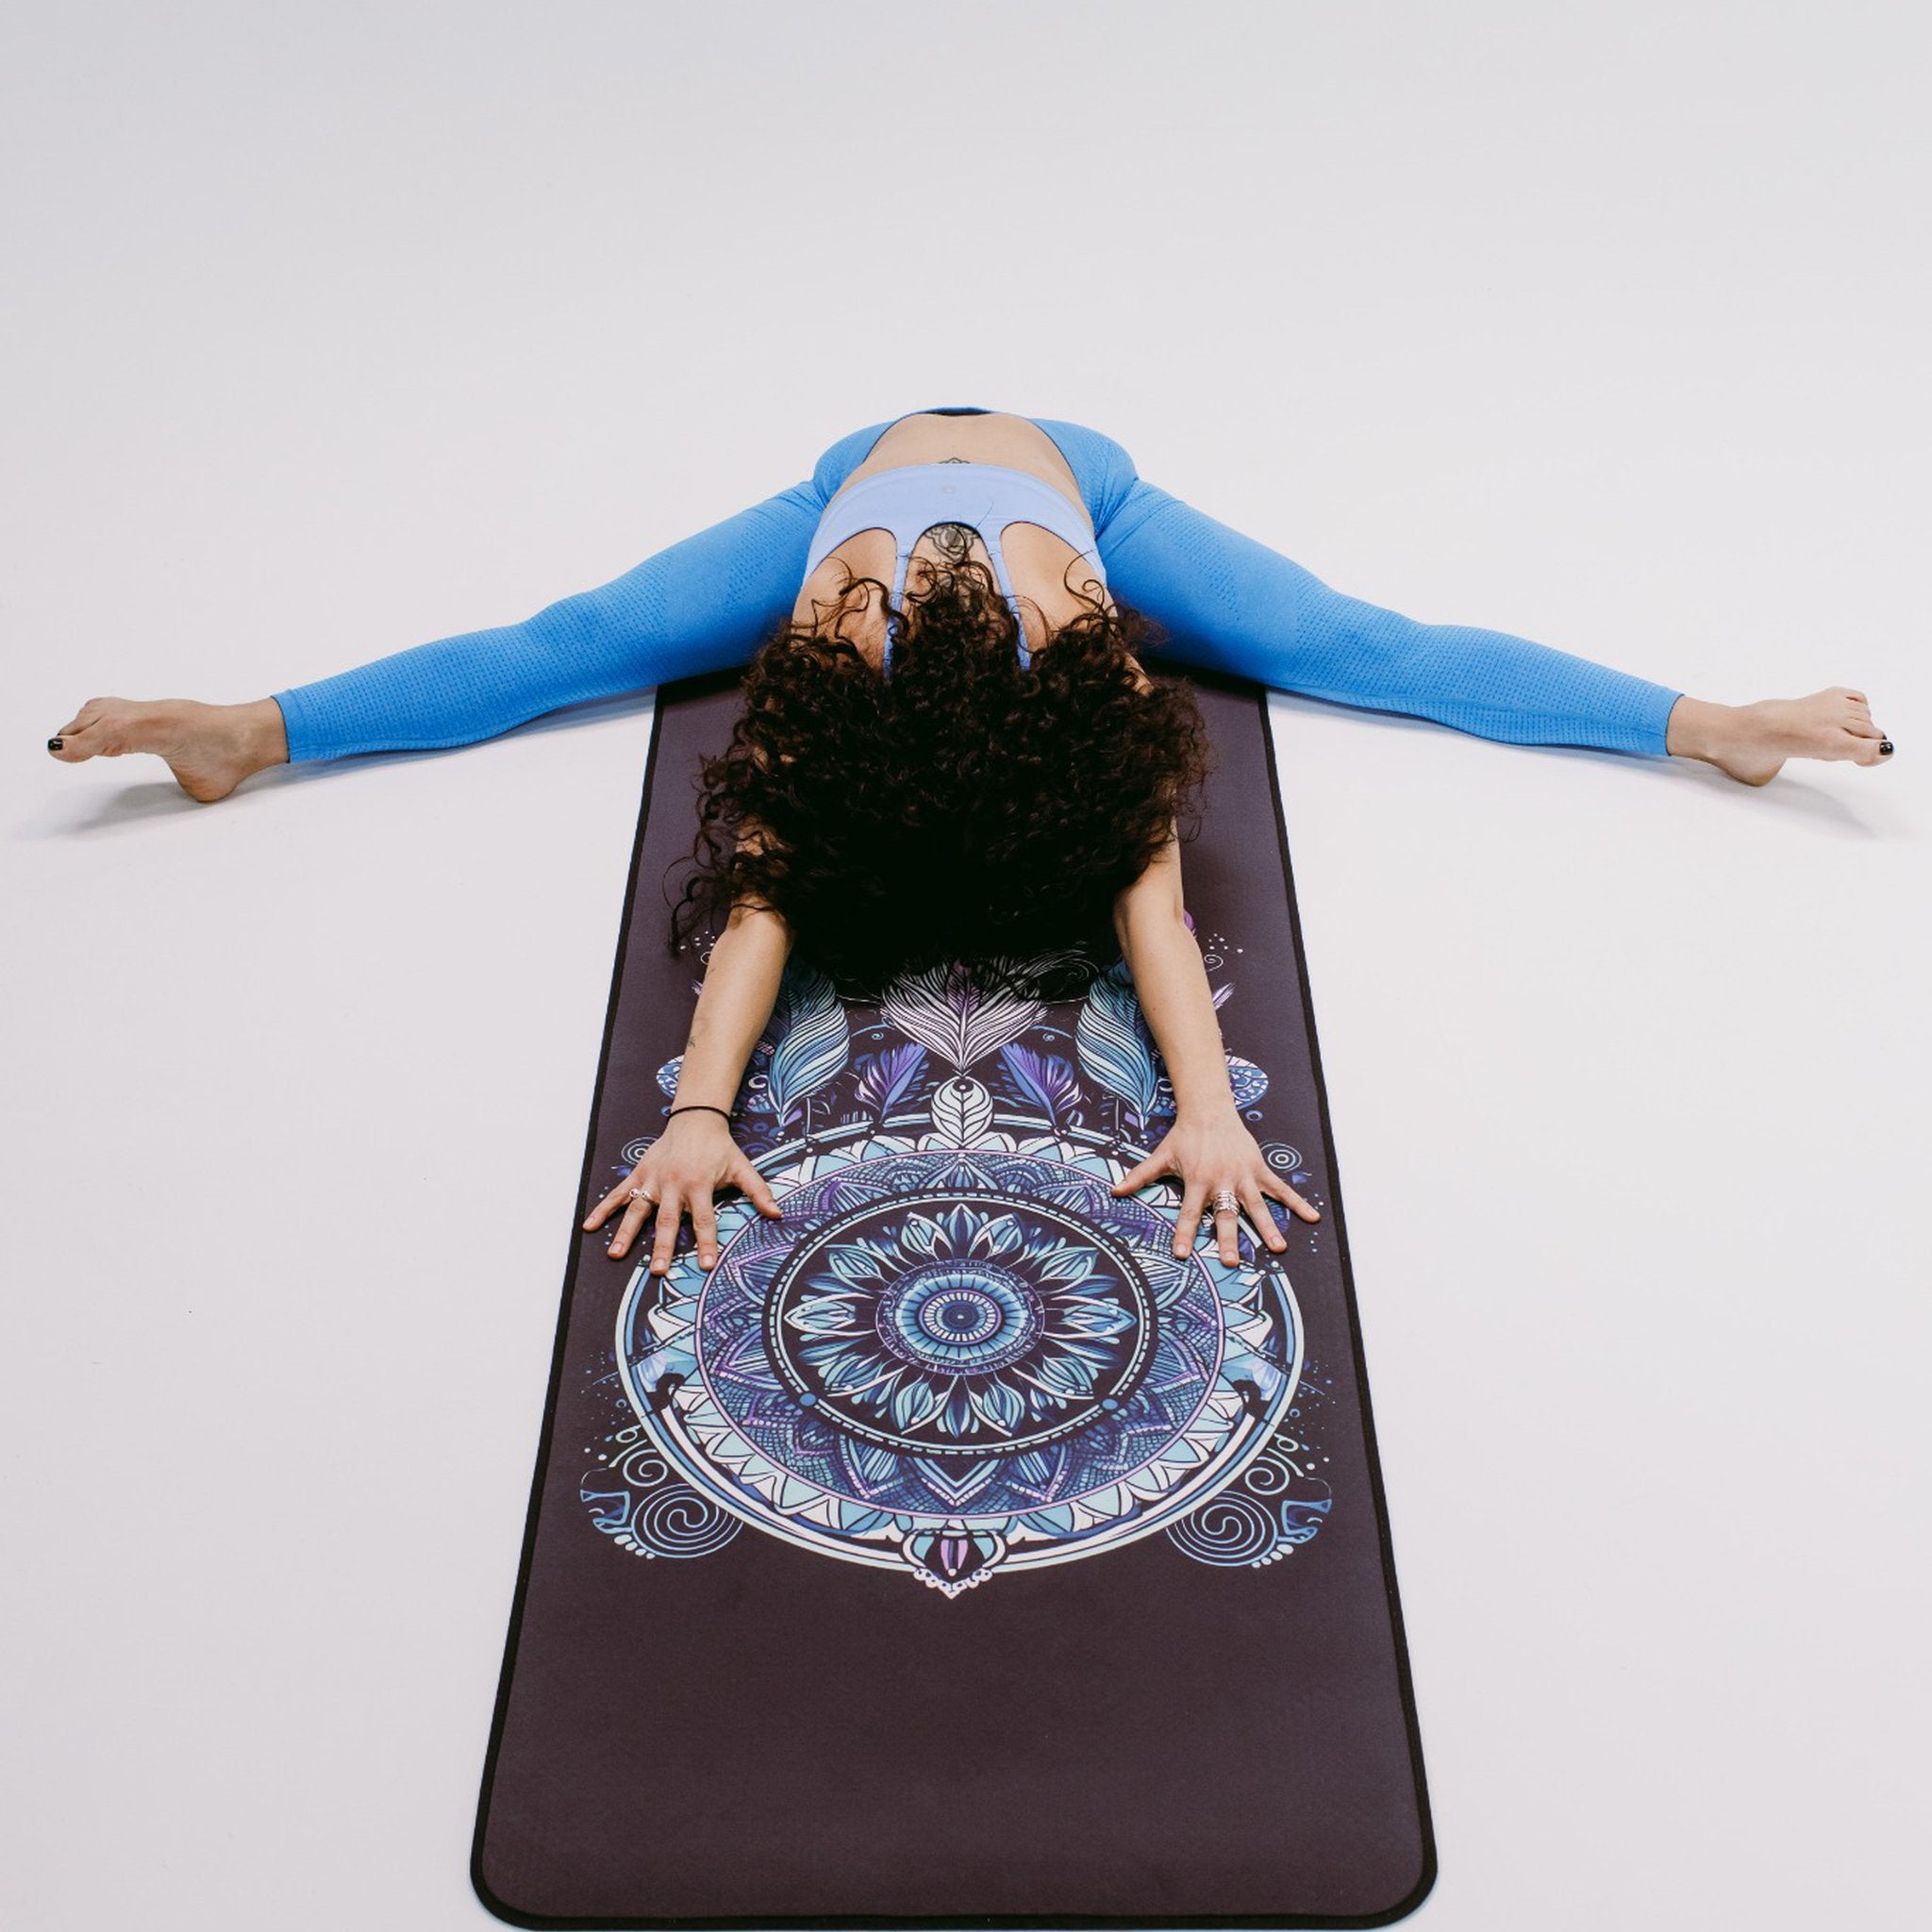 Can a Yoga Mat Be a Personal Item?